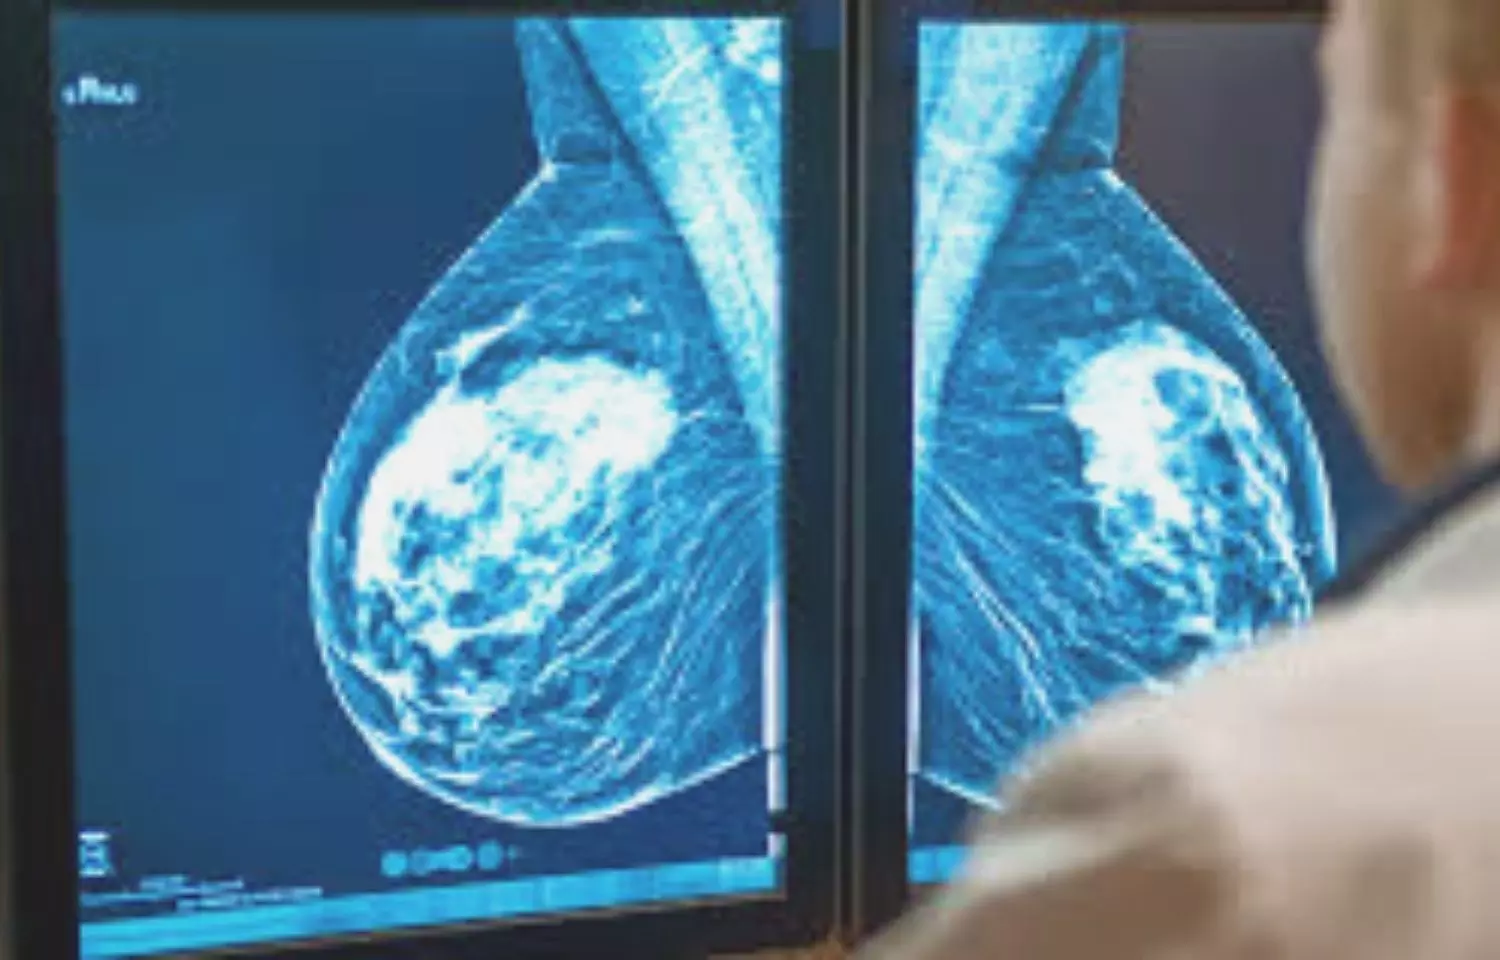 Ultrasound more accurate for assisting breast cancer treatment: Study